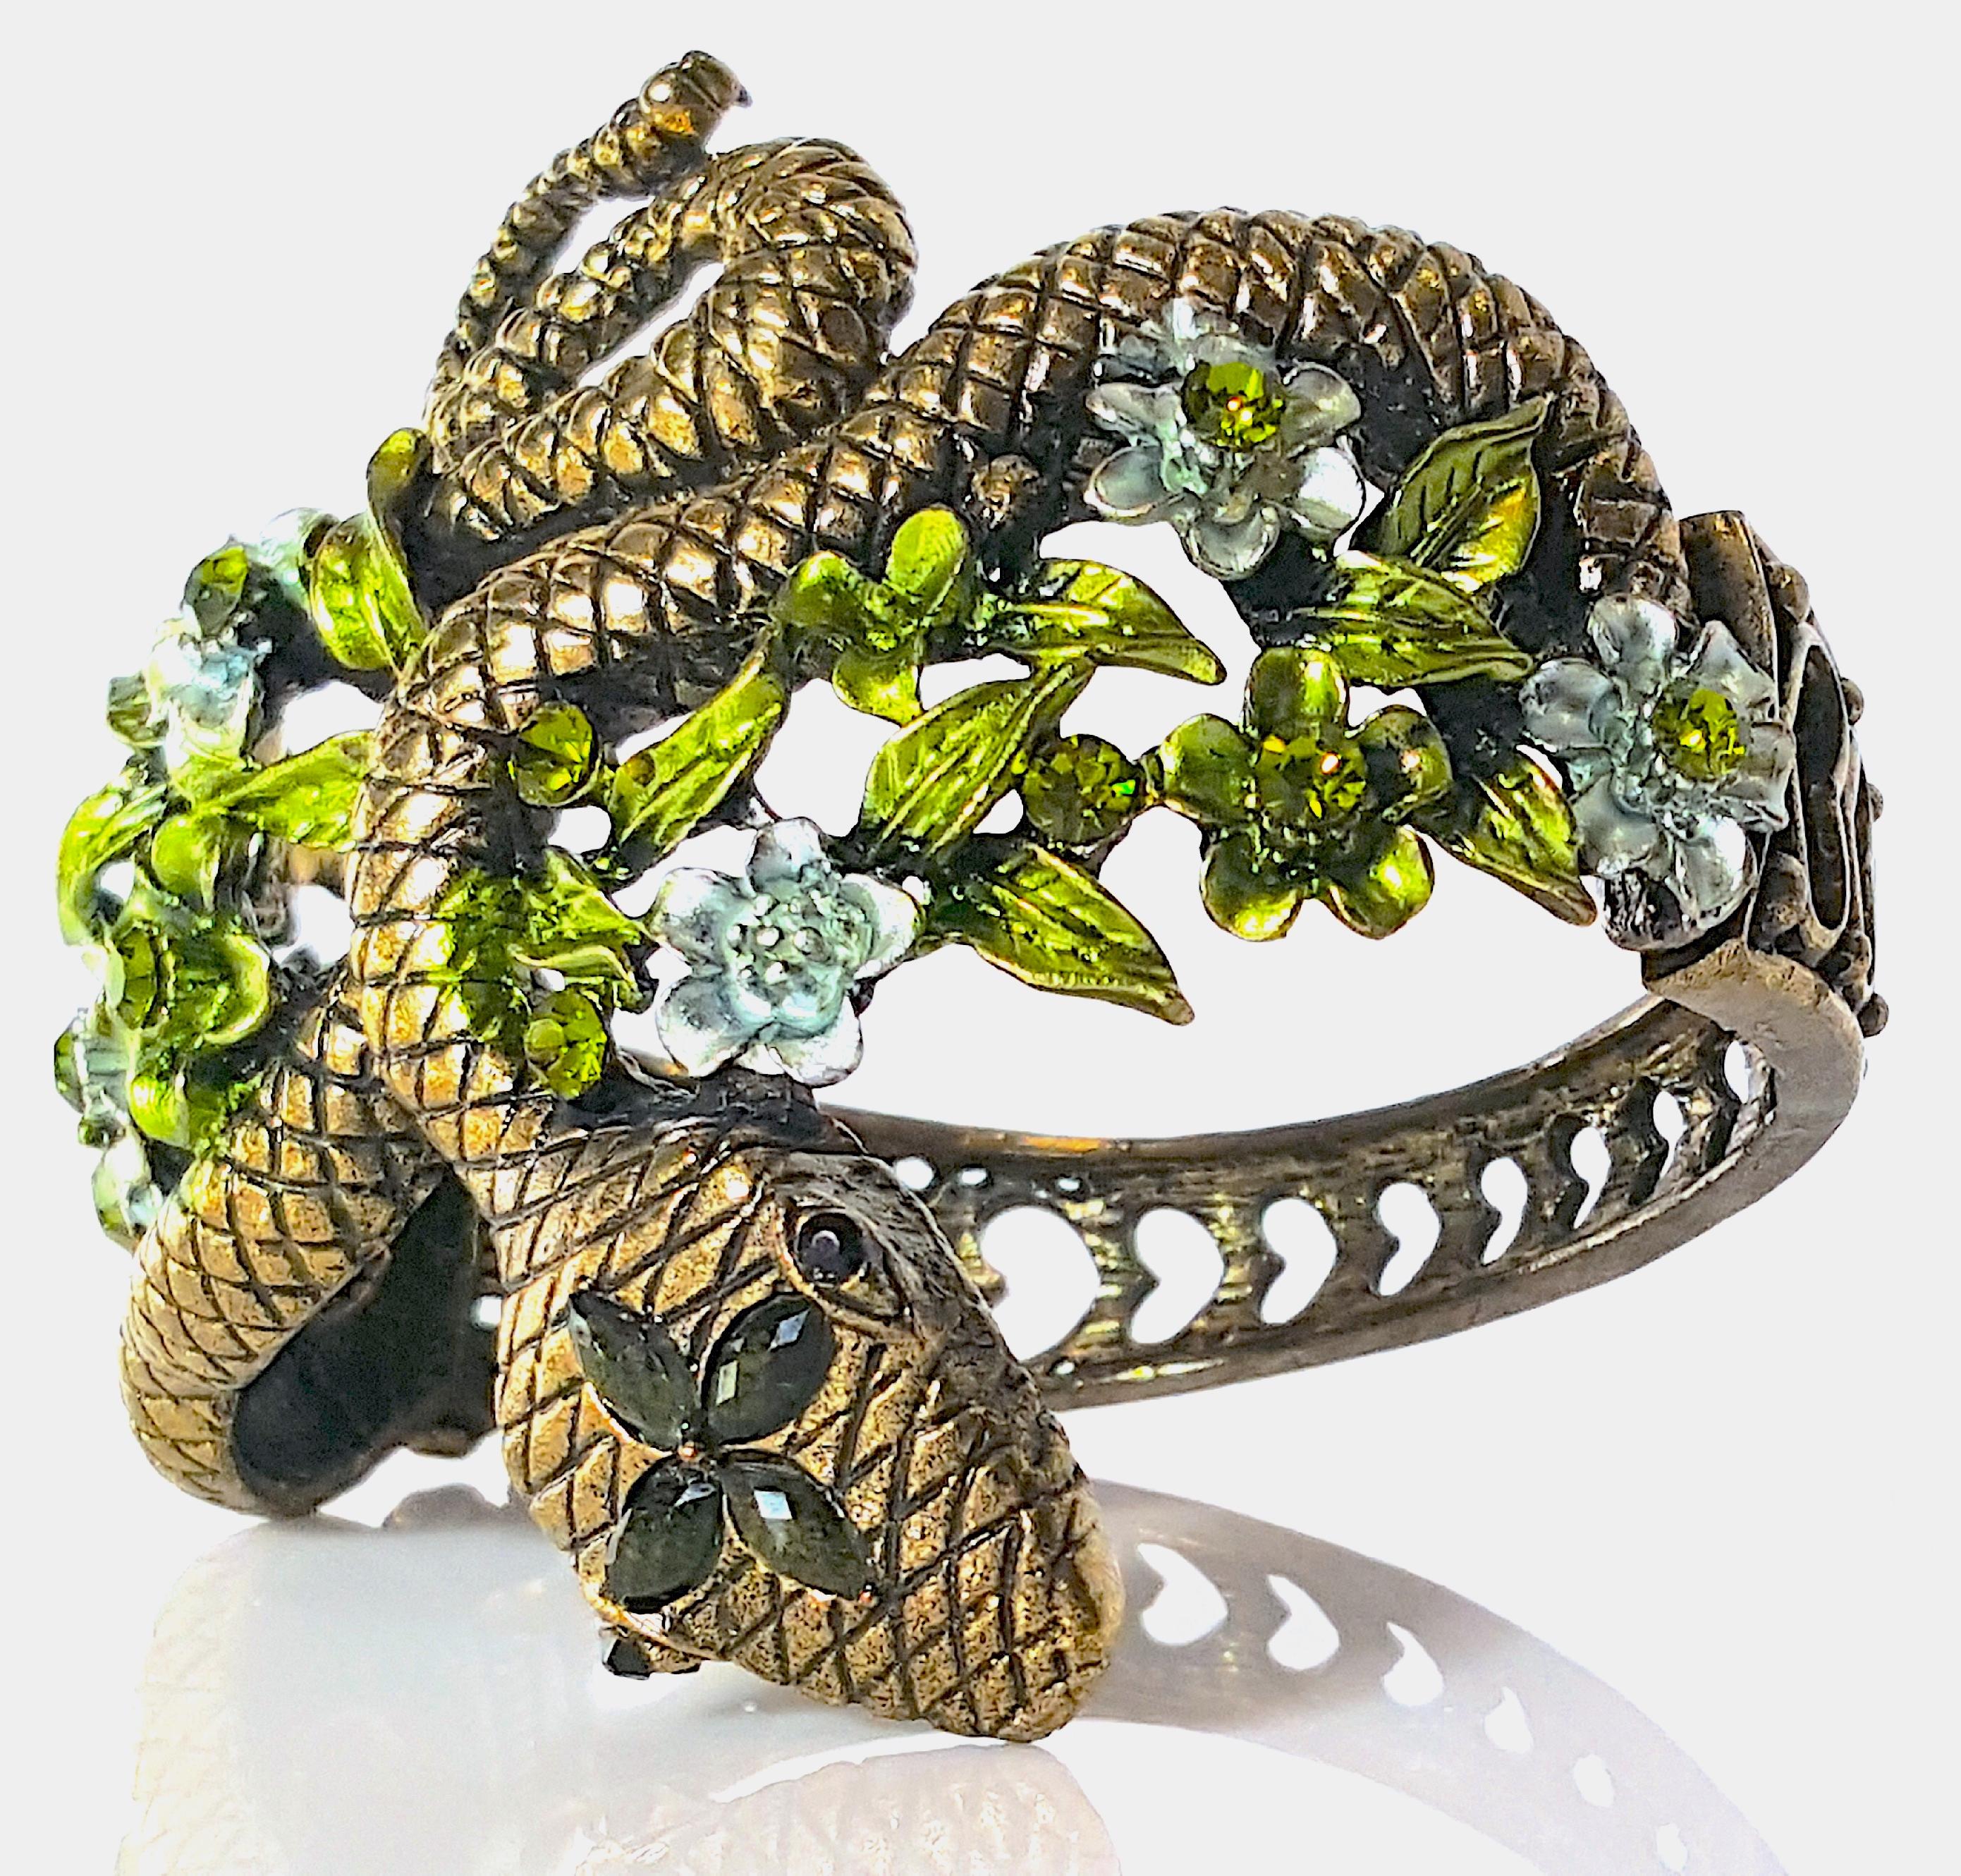 With all the mid-century hallmarks of handcrafted costume jewelry by New-York-City-based Hargo Creations but without the post-copyright signature (HAR), for this early bracelet the design duo created a cast aged-gold textured serpent snake that